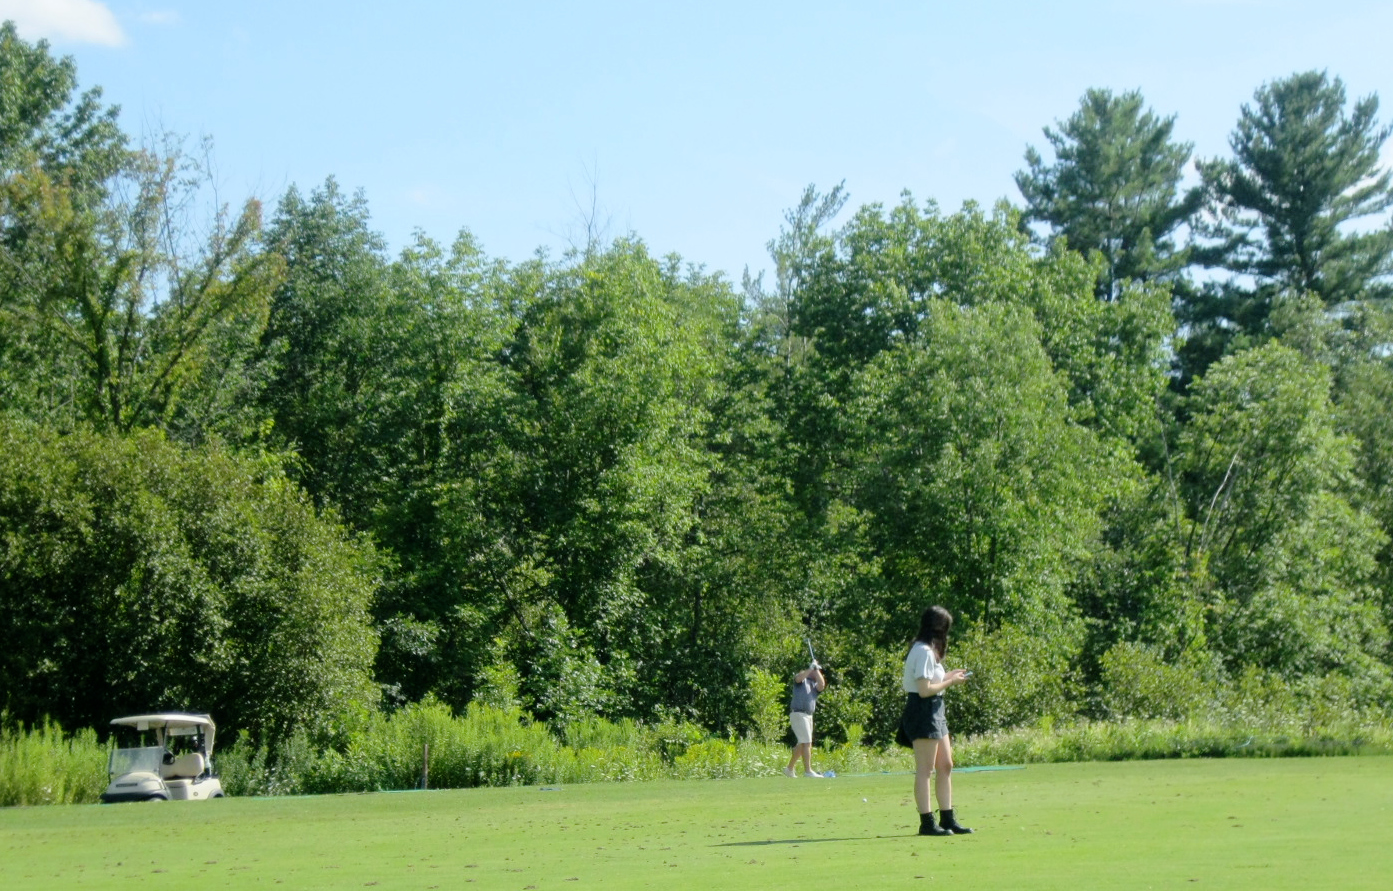 A young woman wearing black boots stands in the foreground while an older man in the background practices his golf swing.